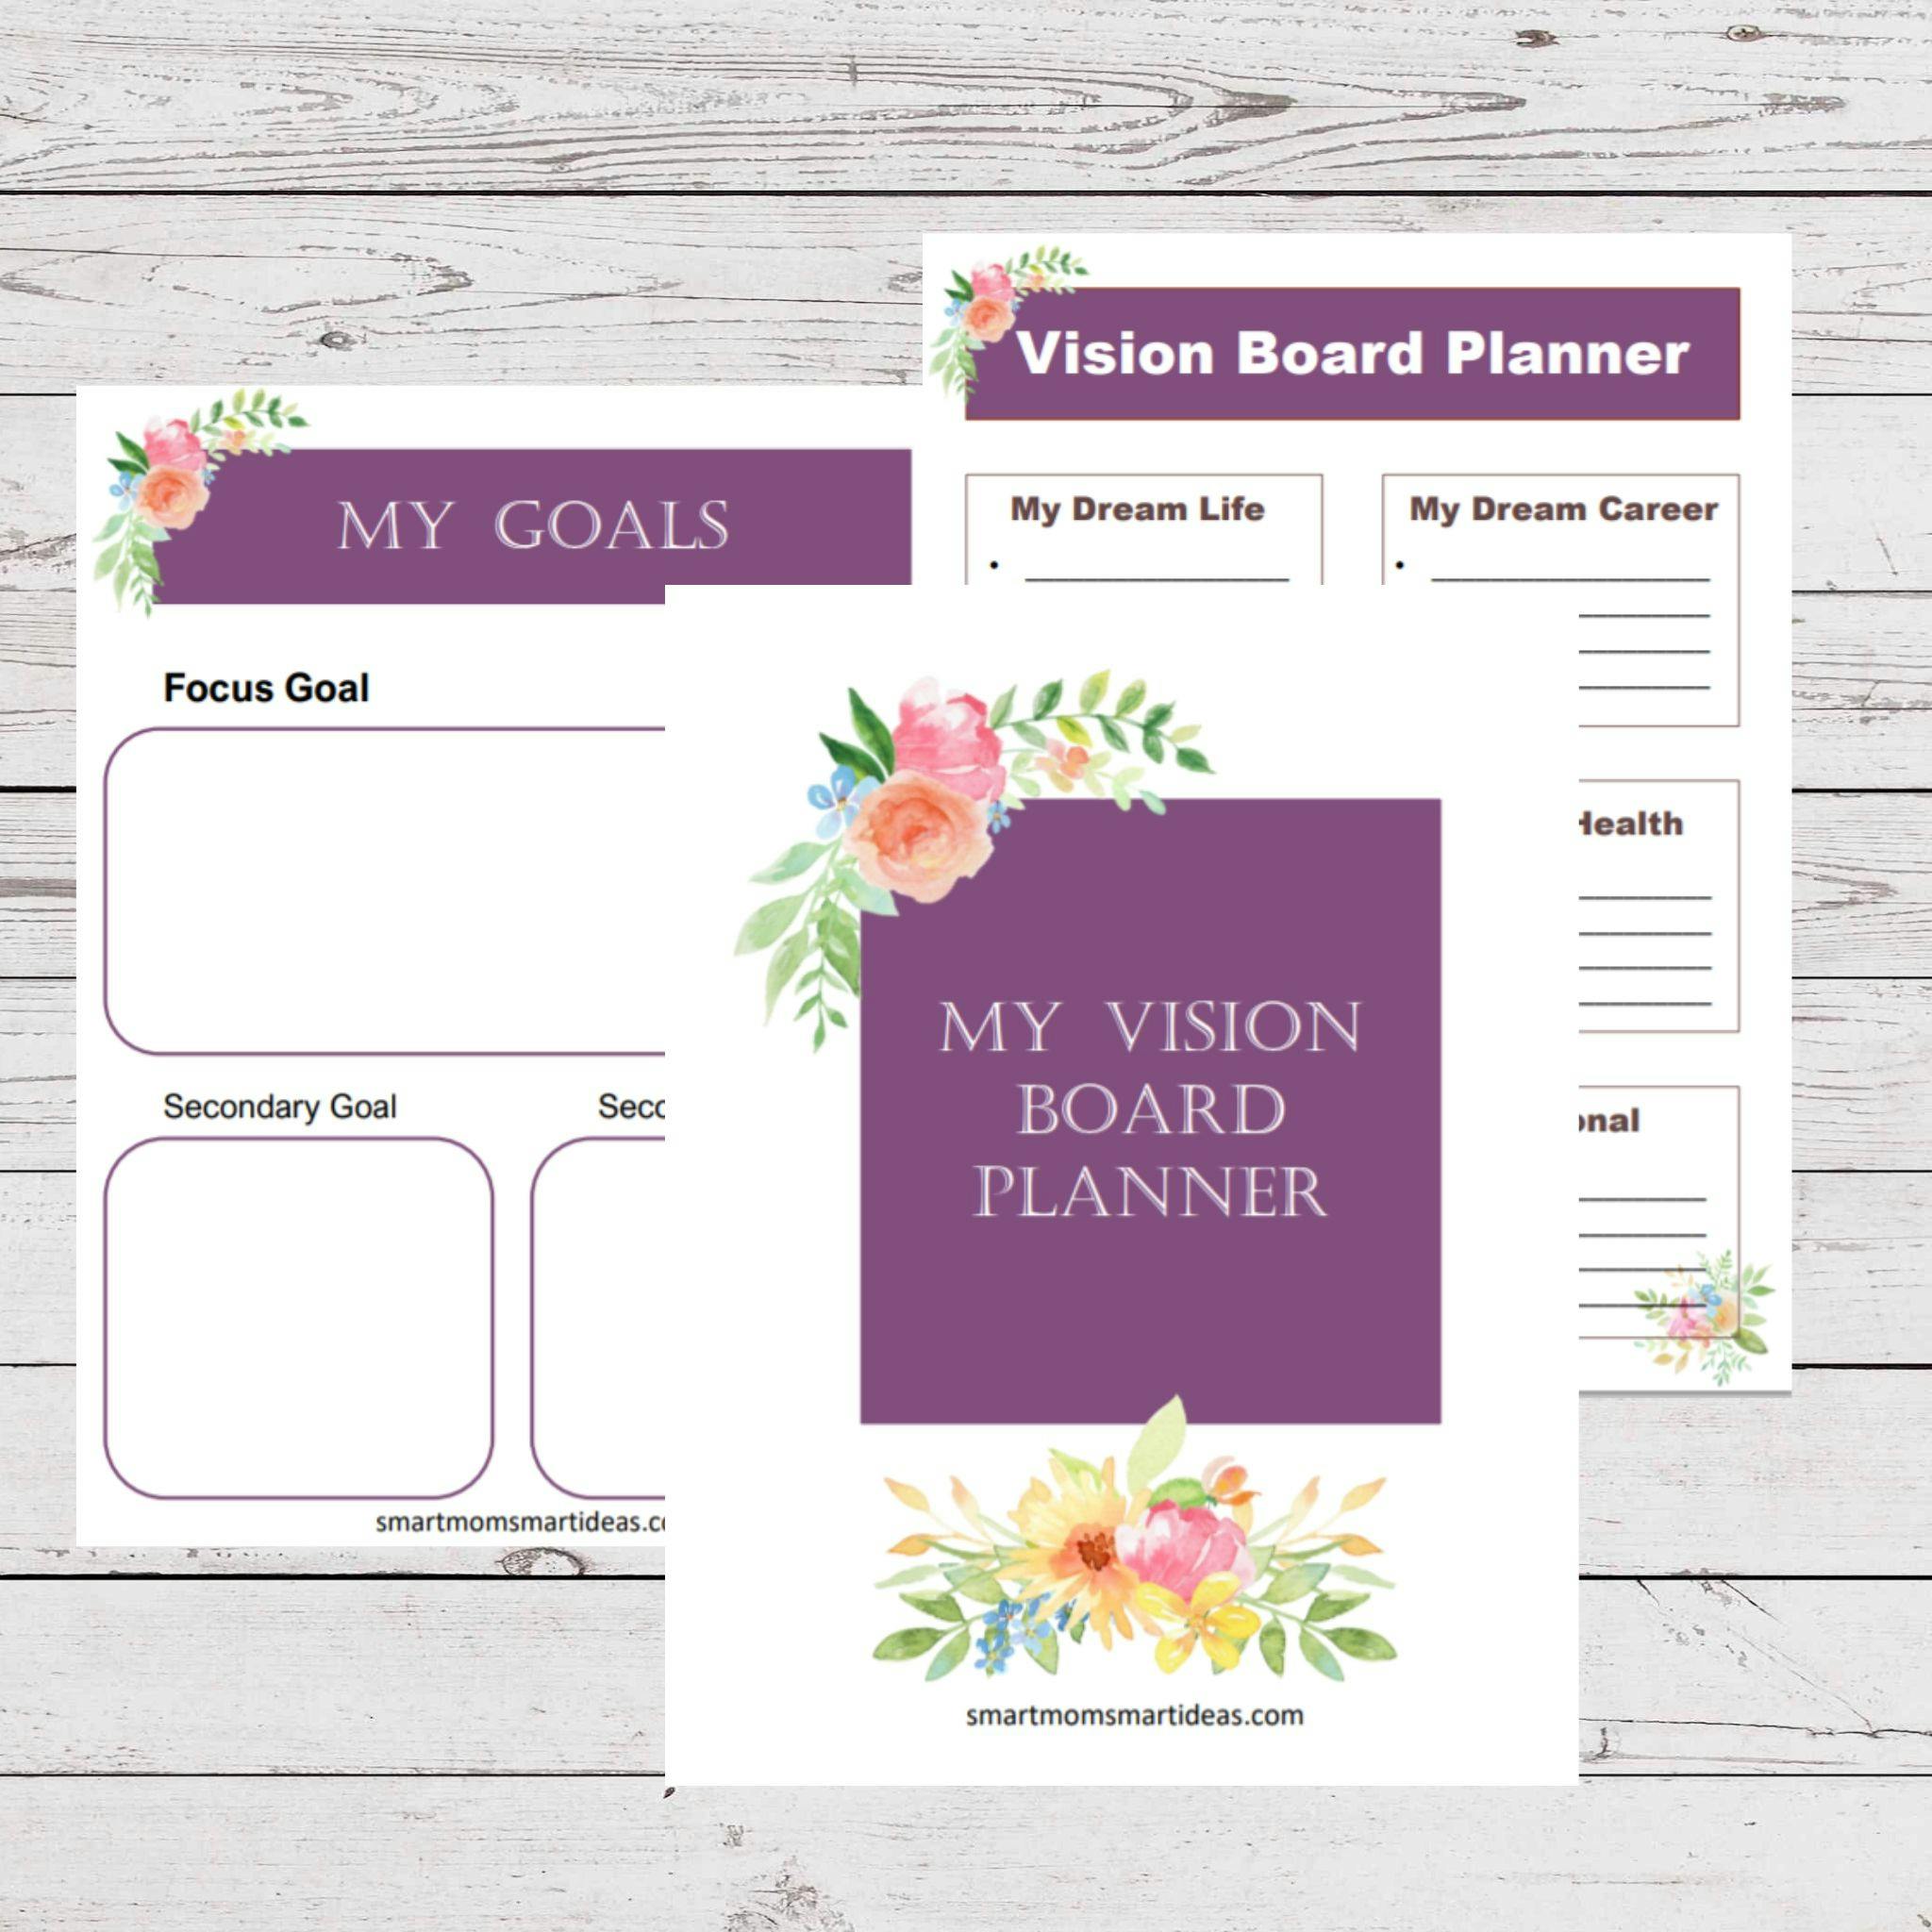 Vision Board Examples And Free Vision Board Printables Goal Setting Smart Mom Smart Ideas